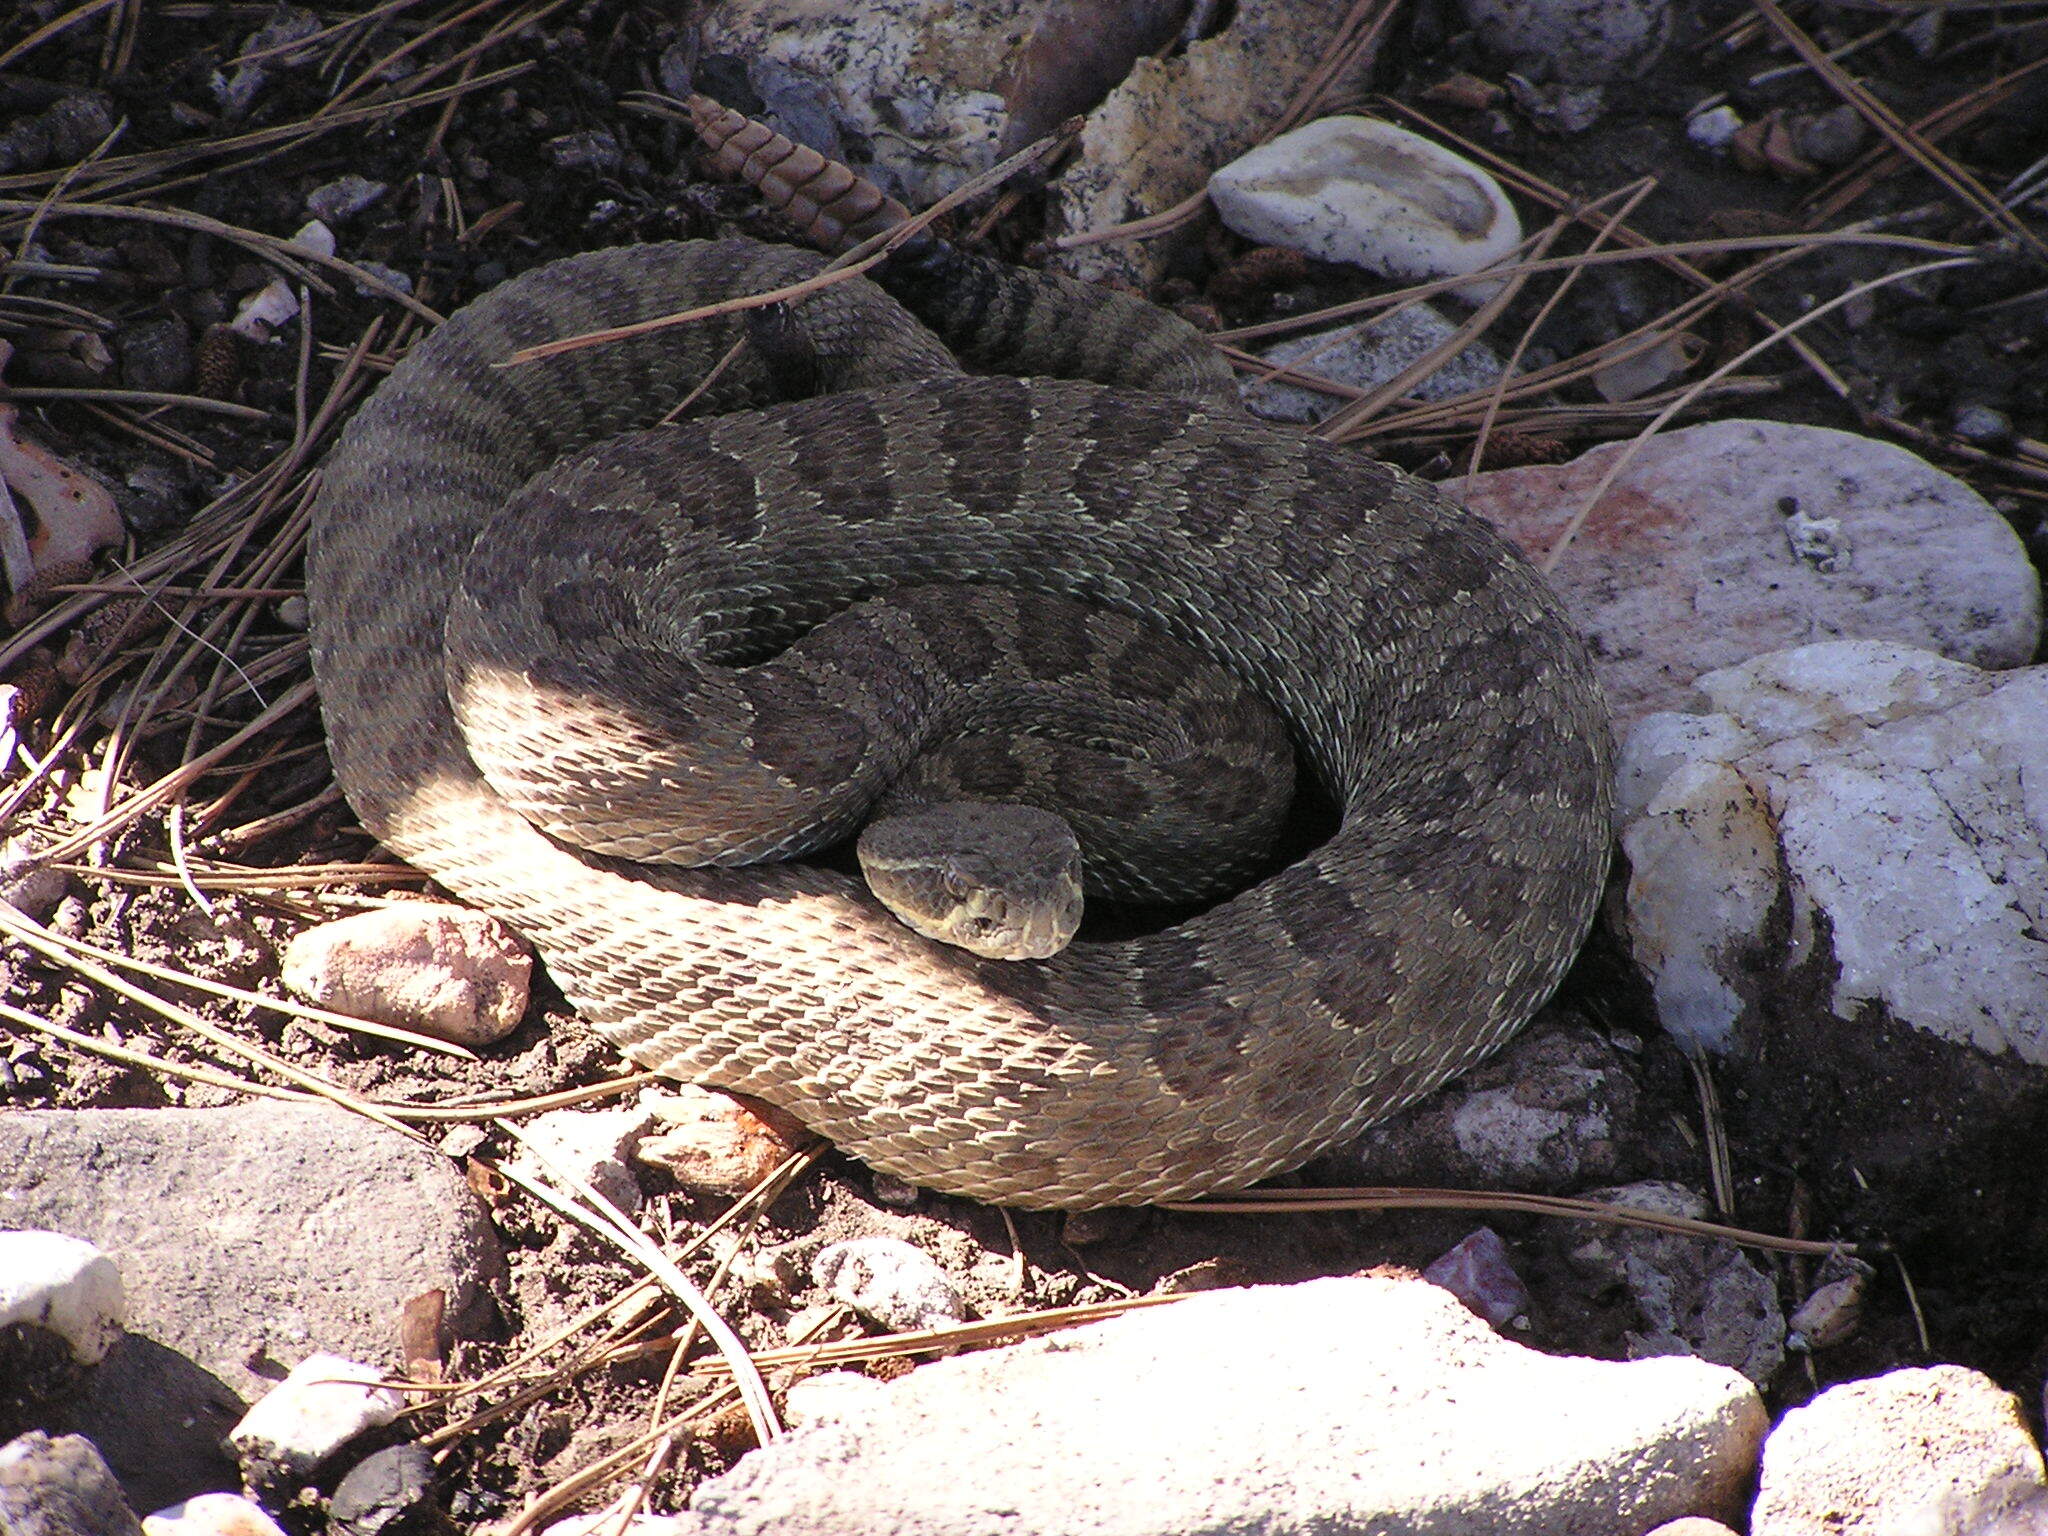 a brown snake with dark patches along its back, a triangular head, and a rattle on the end of its tail